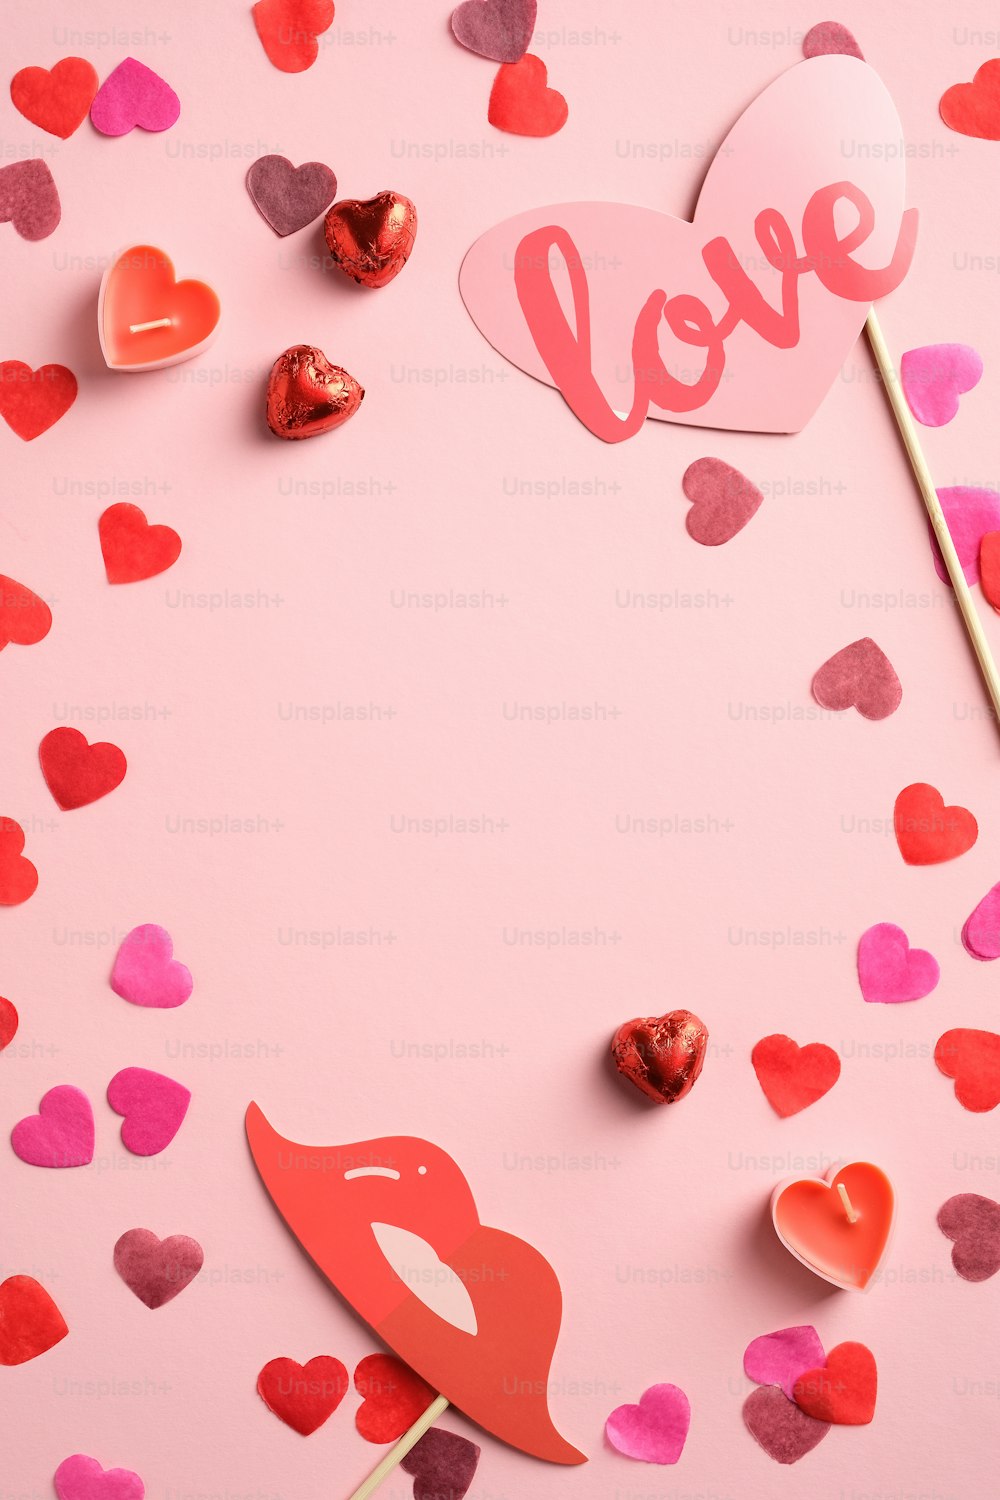 Valentines Day flat lay composition with hearts and decorations on pink background. Vertical banner mockup, flyer design, poster template.